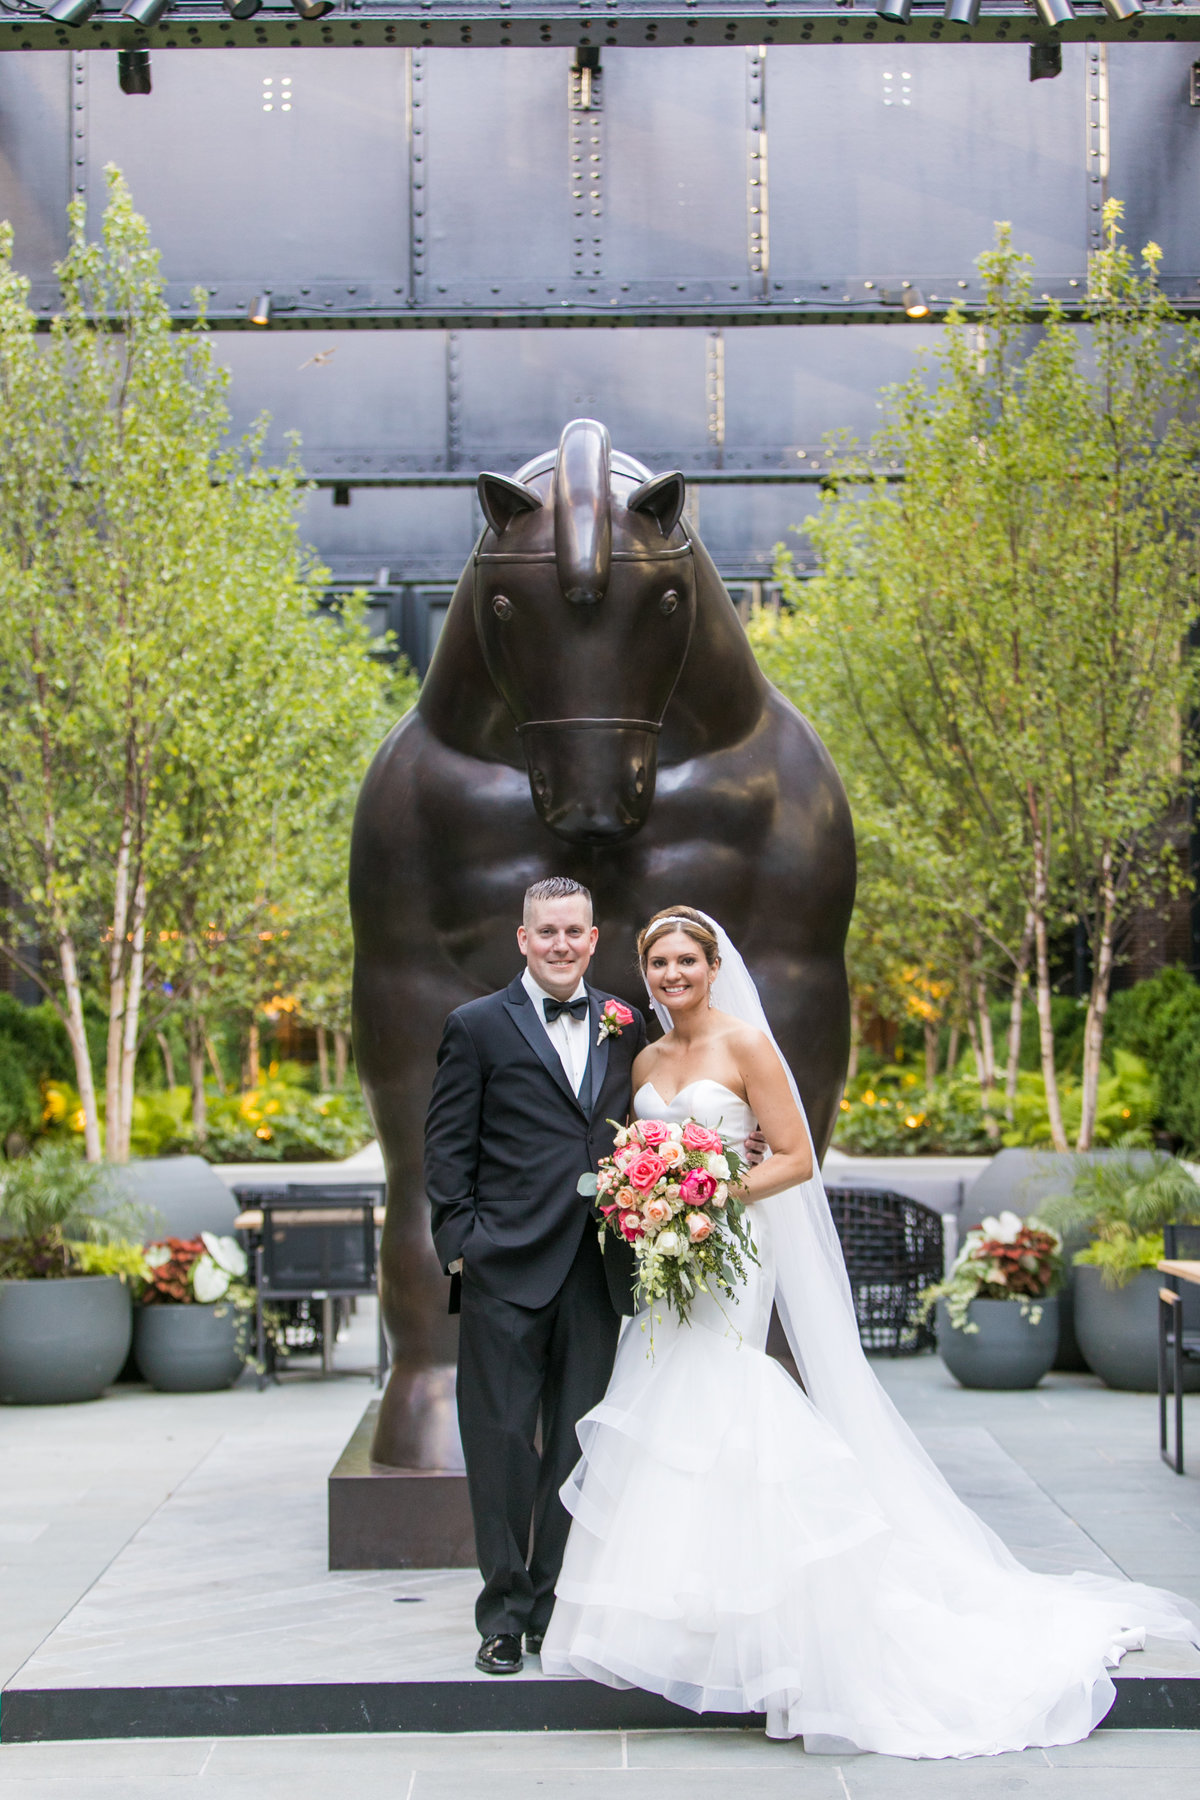 Sagamore Pendry Baltimore wedding with the horse